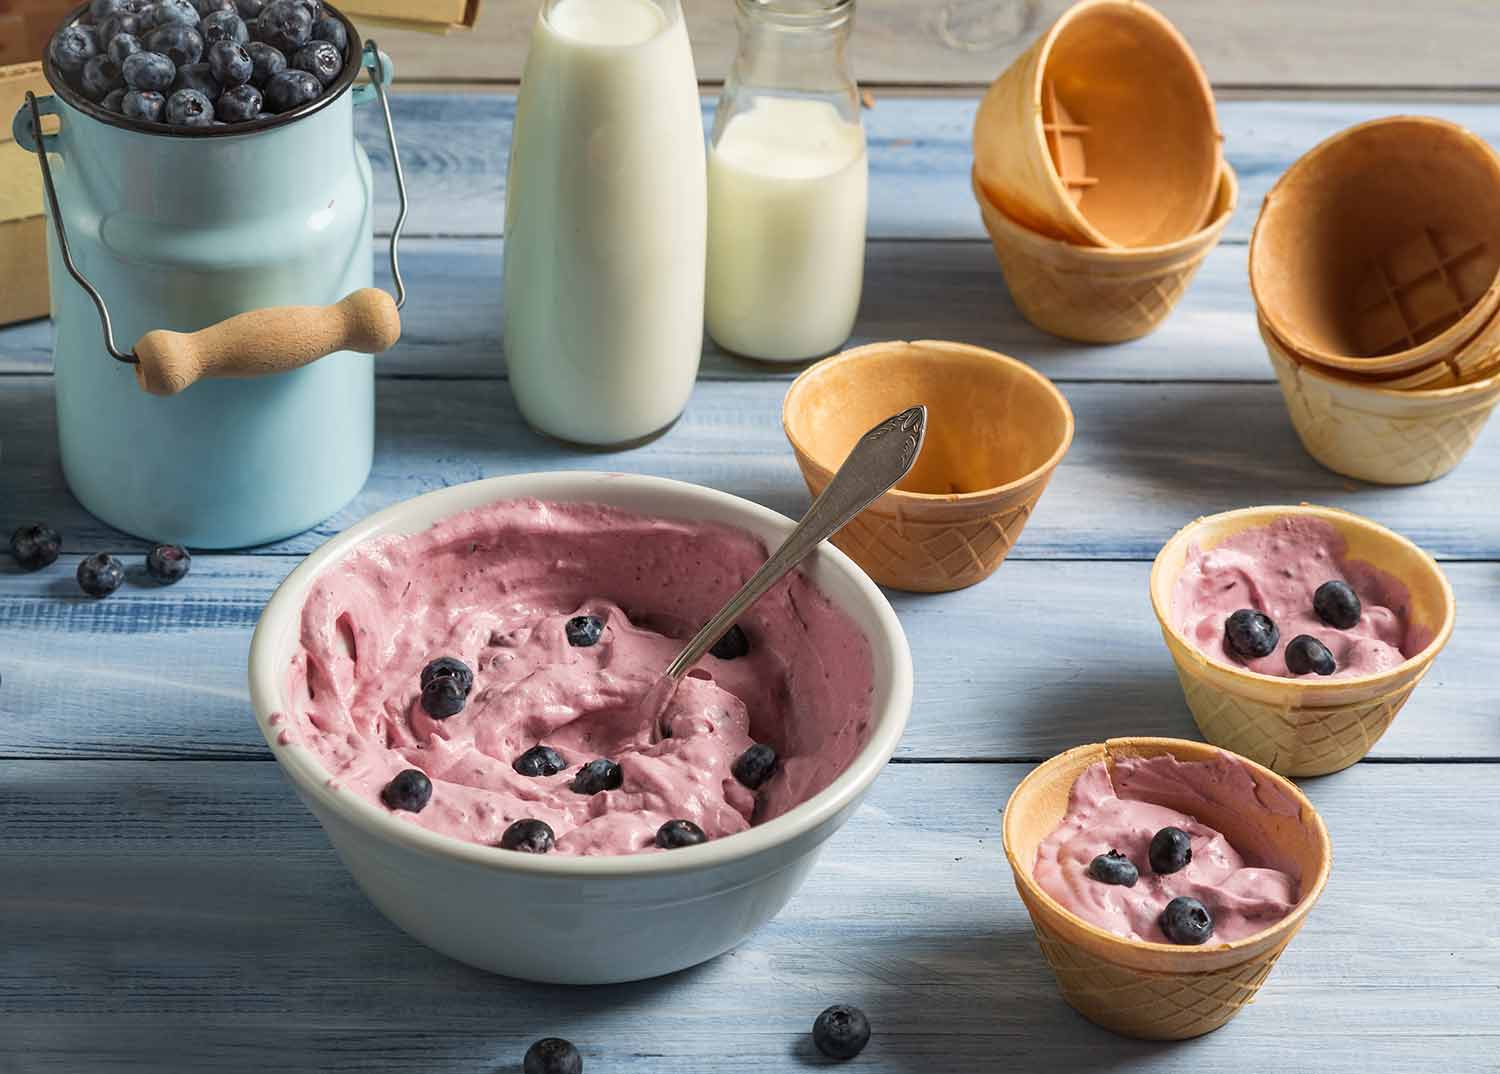 One large bowl and two small bowls of blueberry ice cream with other bowls and bottles of milk